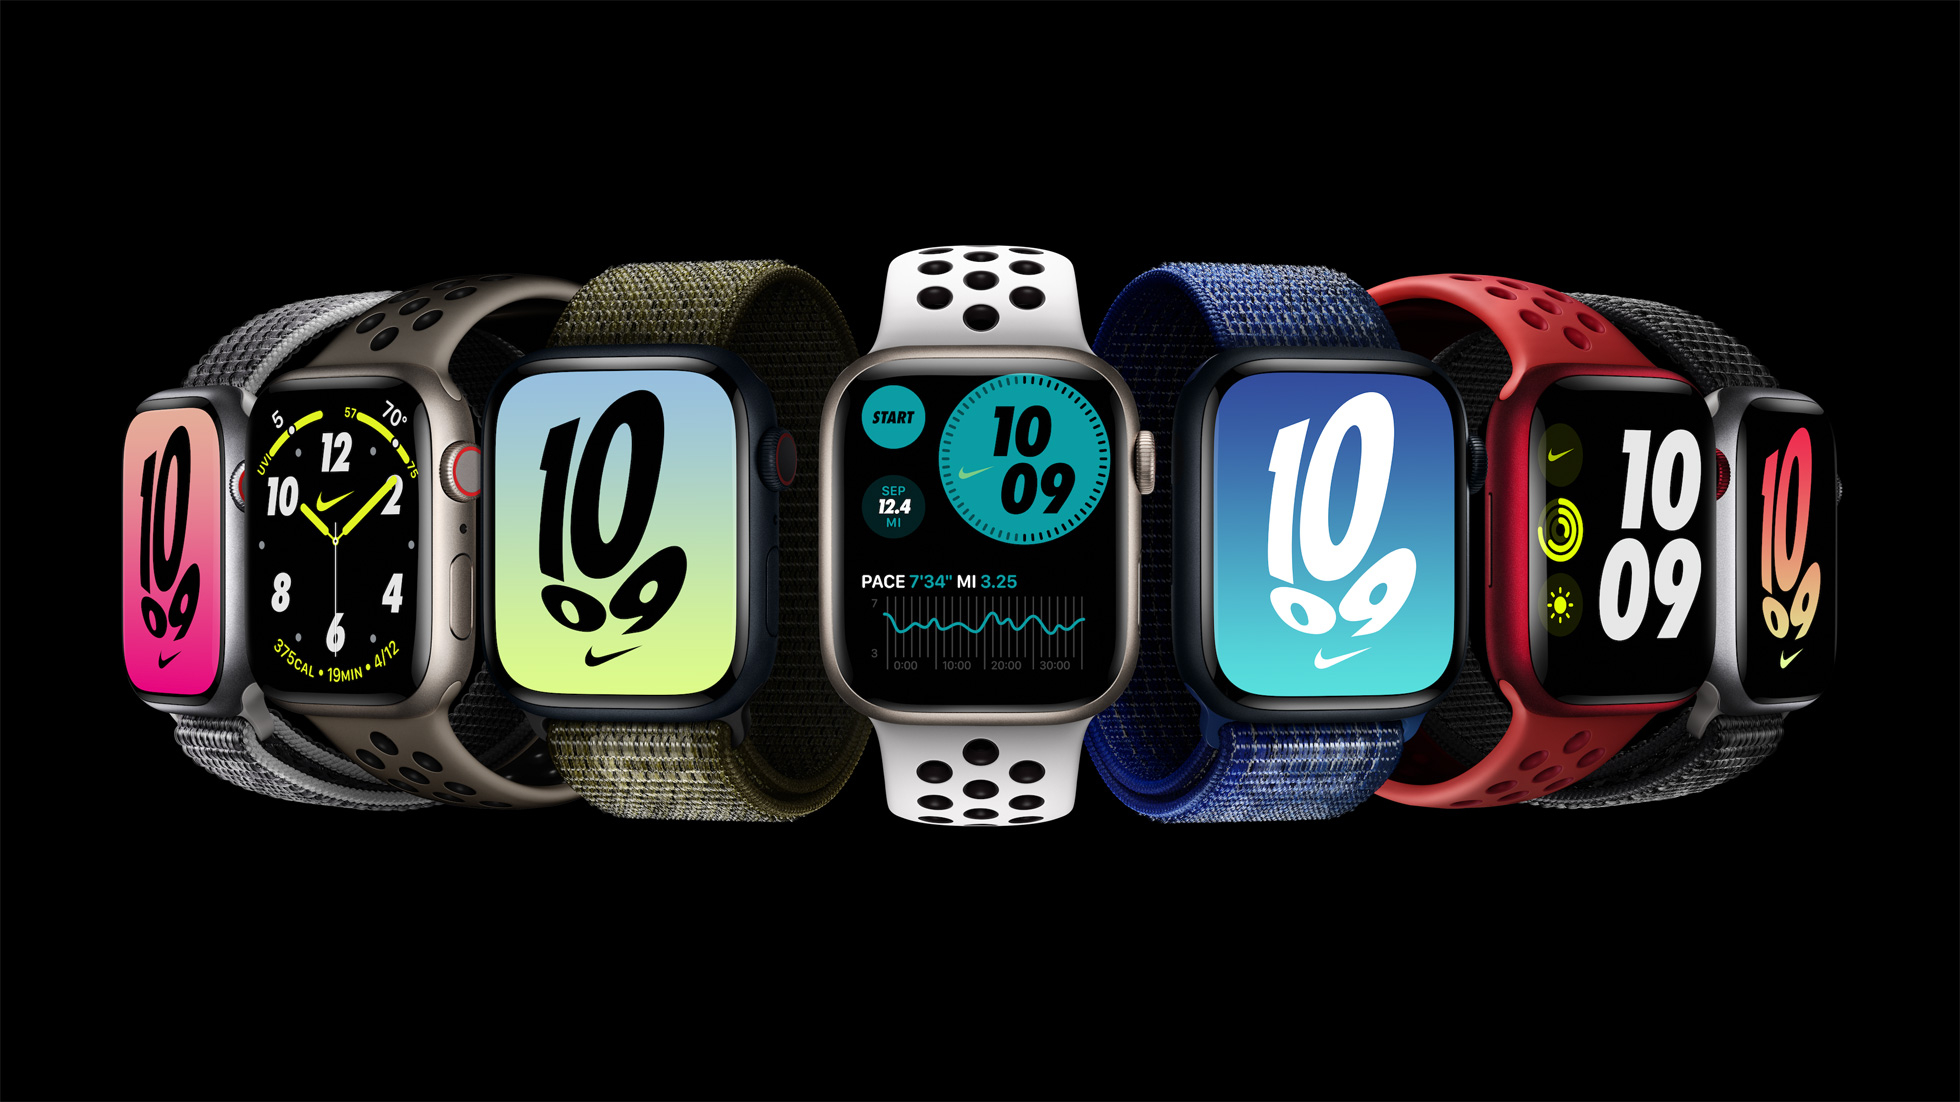 Finally, Apple brings Nike Watch faces to everyone